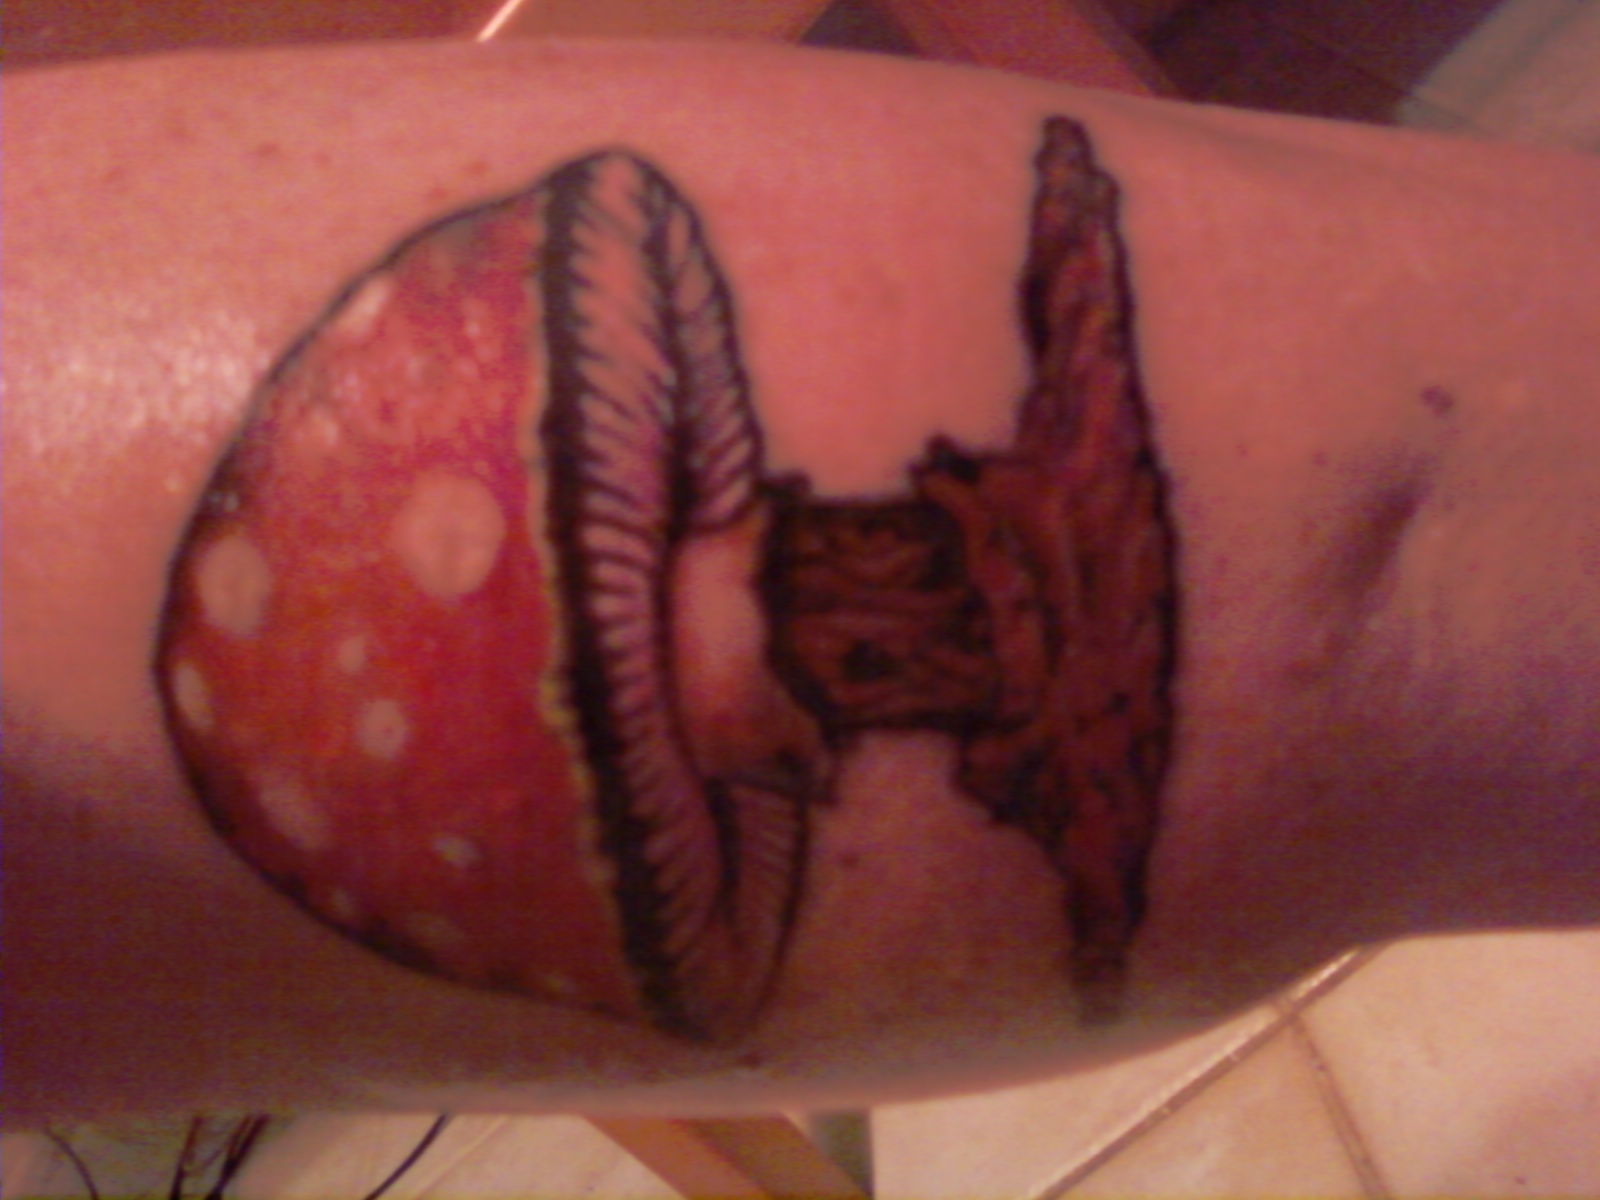 My new mushroom, in time for Wanee '09